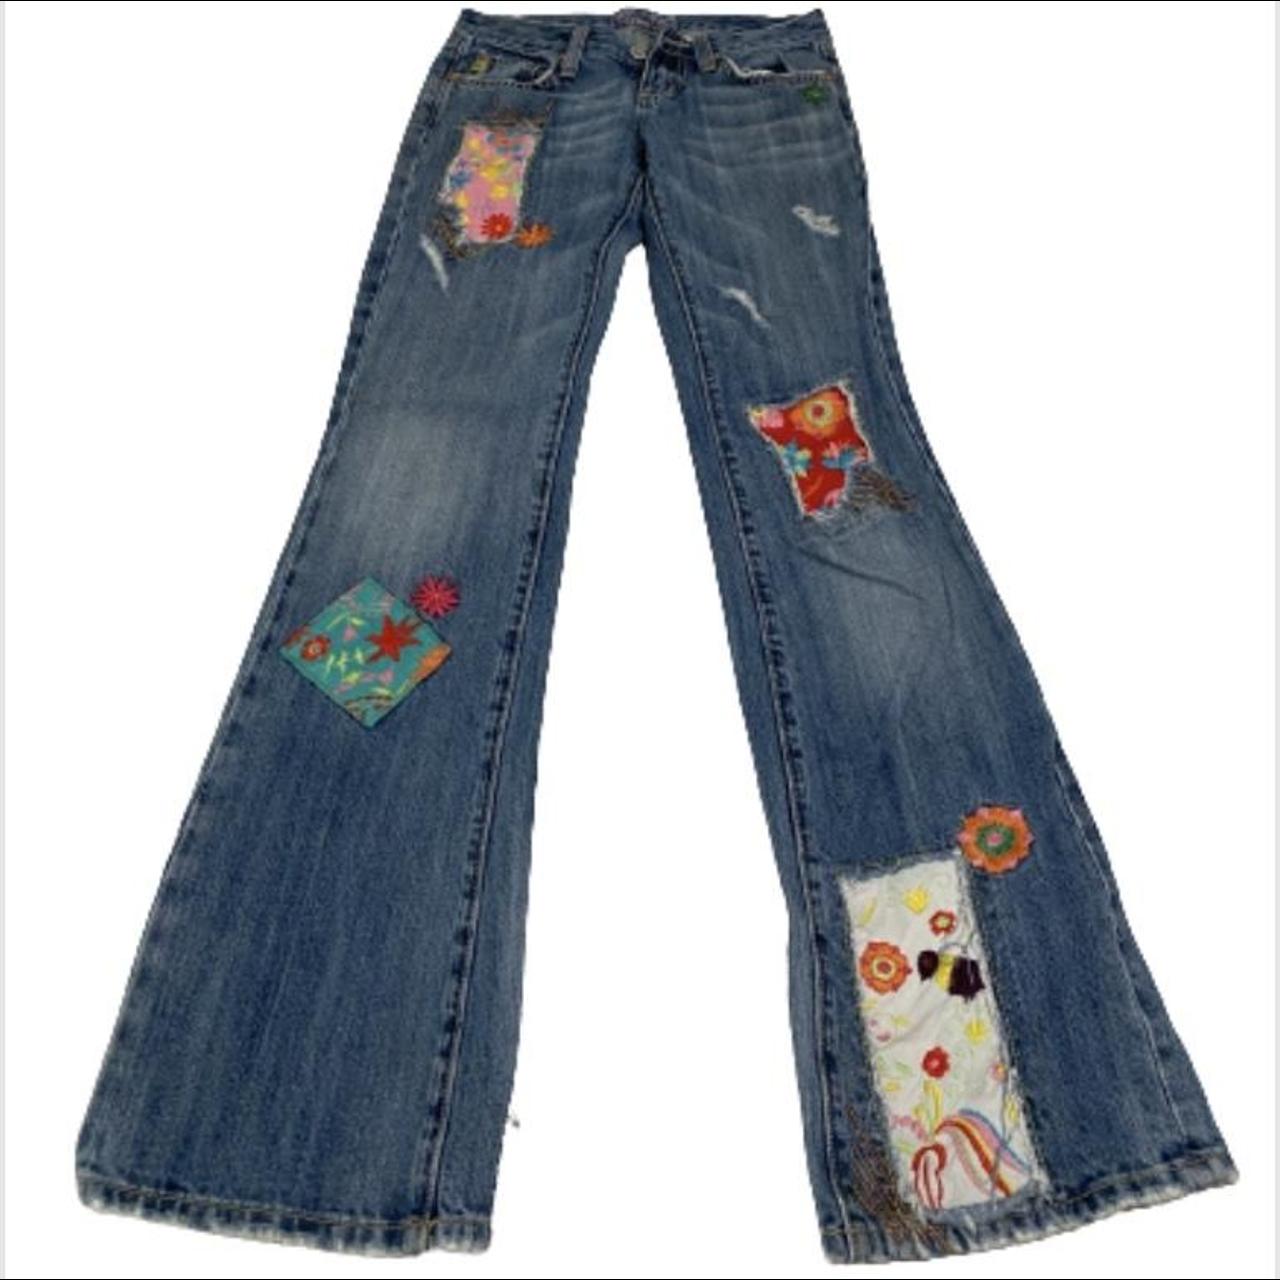 Vintage miss me jeans Size 25 bunch of patches so... - Depop